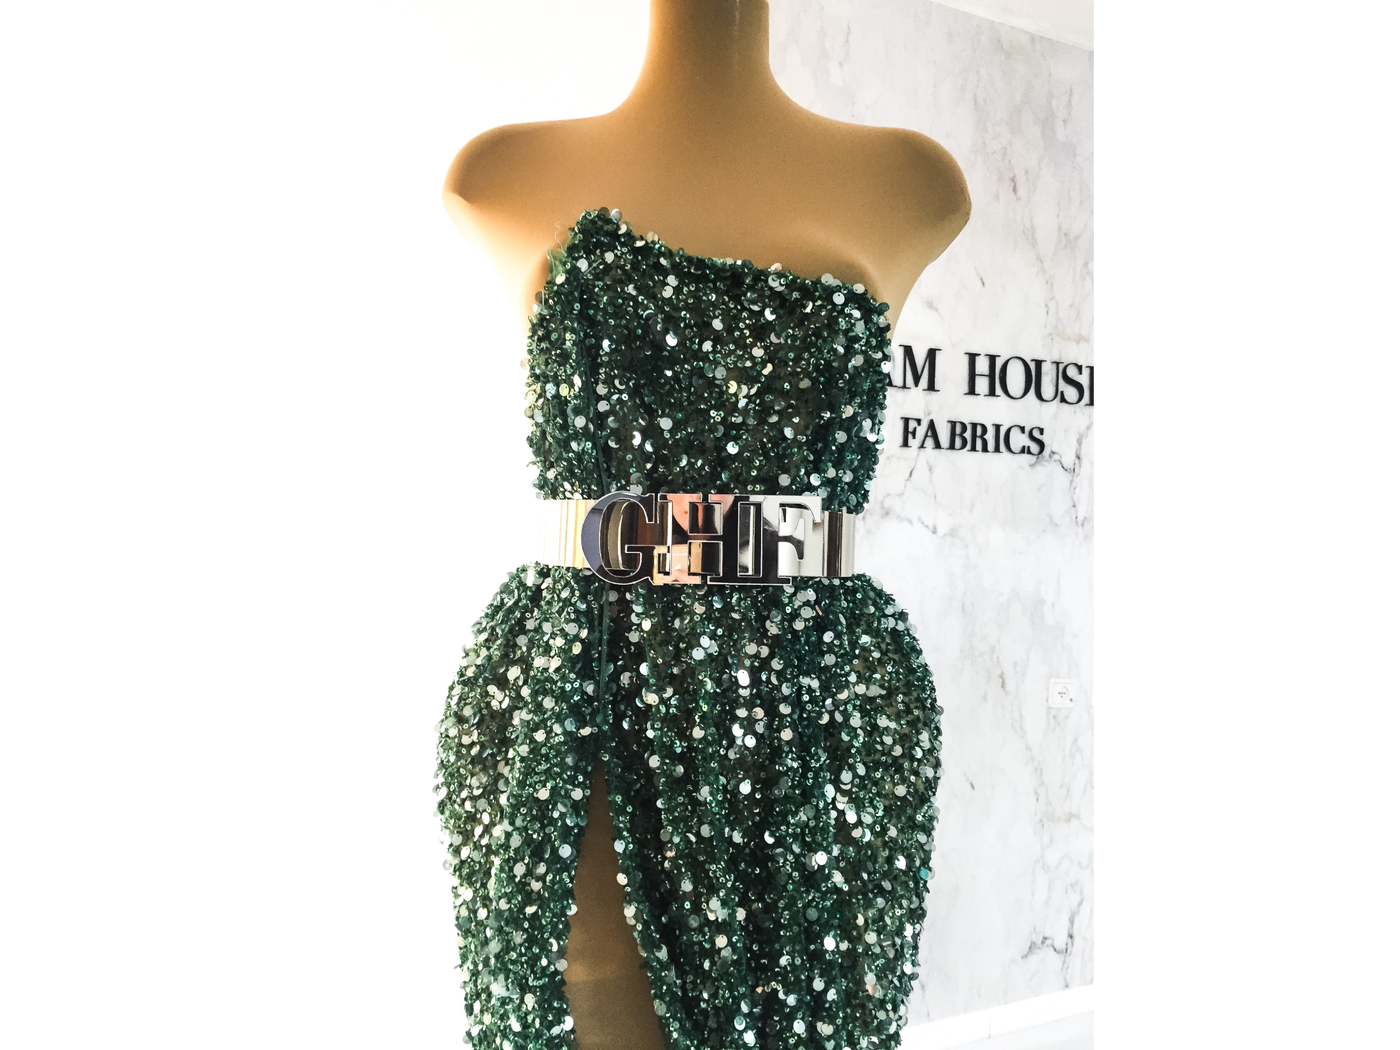 Evening dress made with handmade baeded green lace| beads and sequins| Glam House fabrics